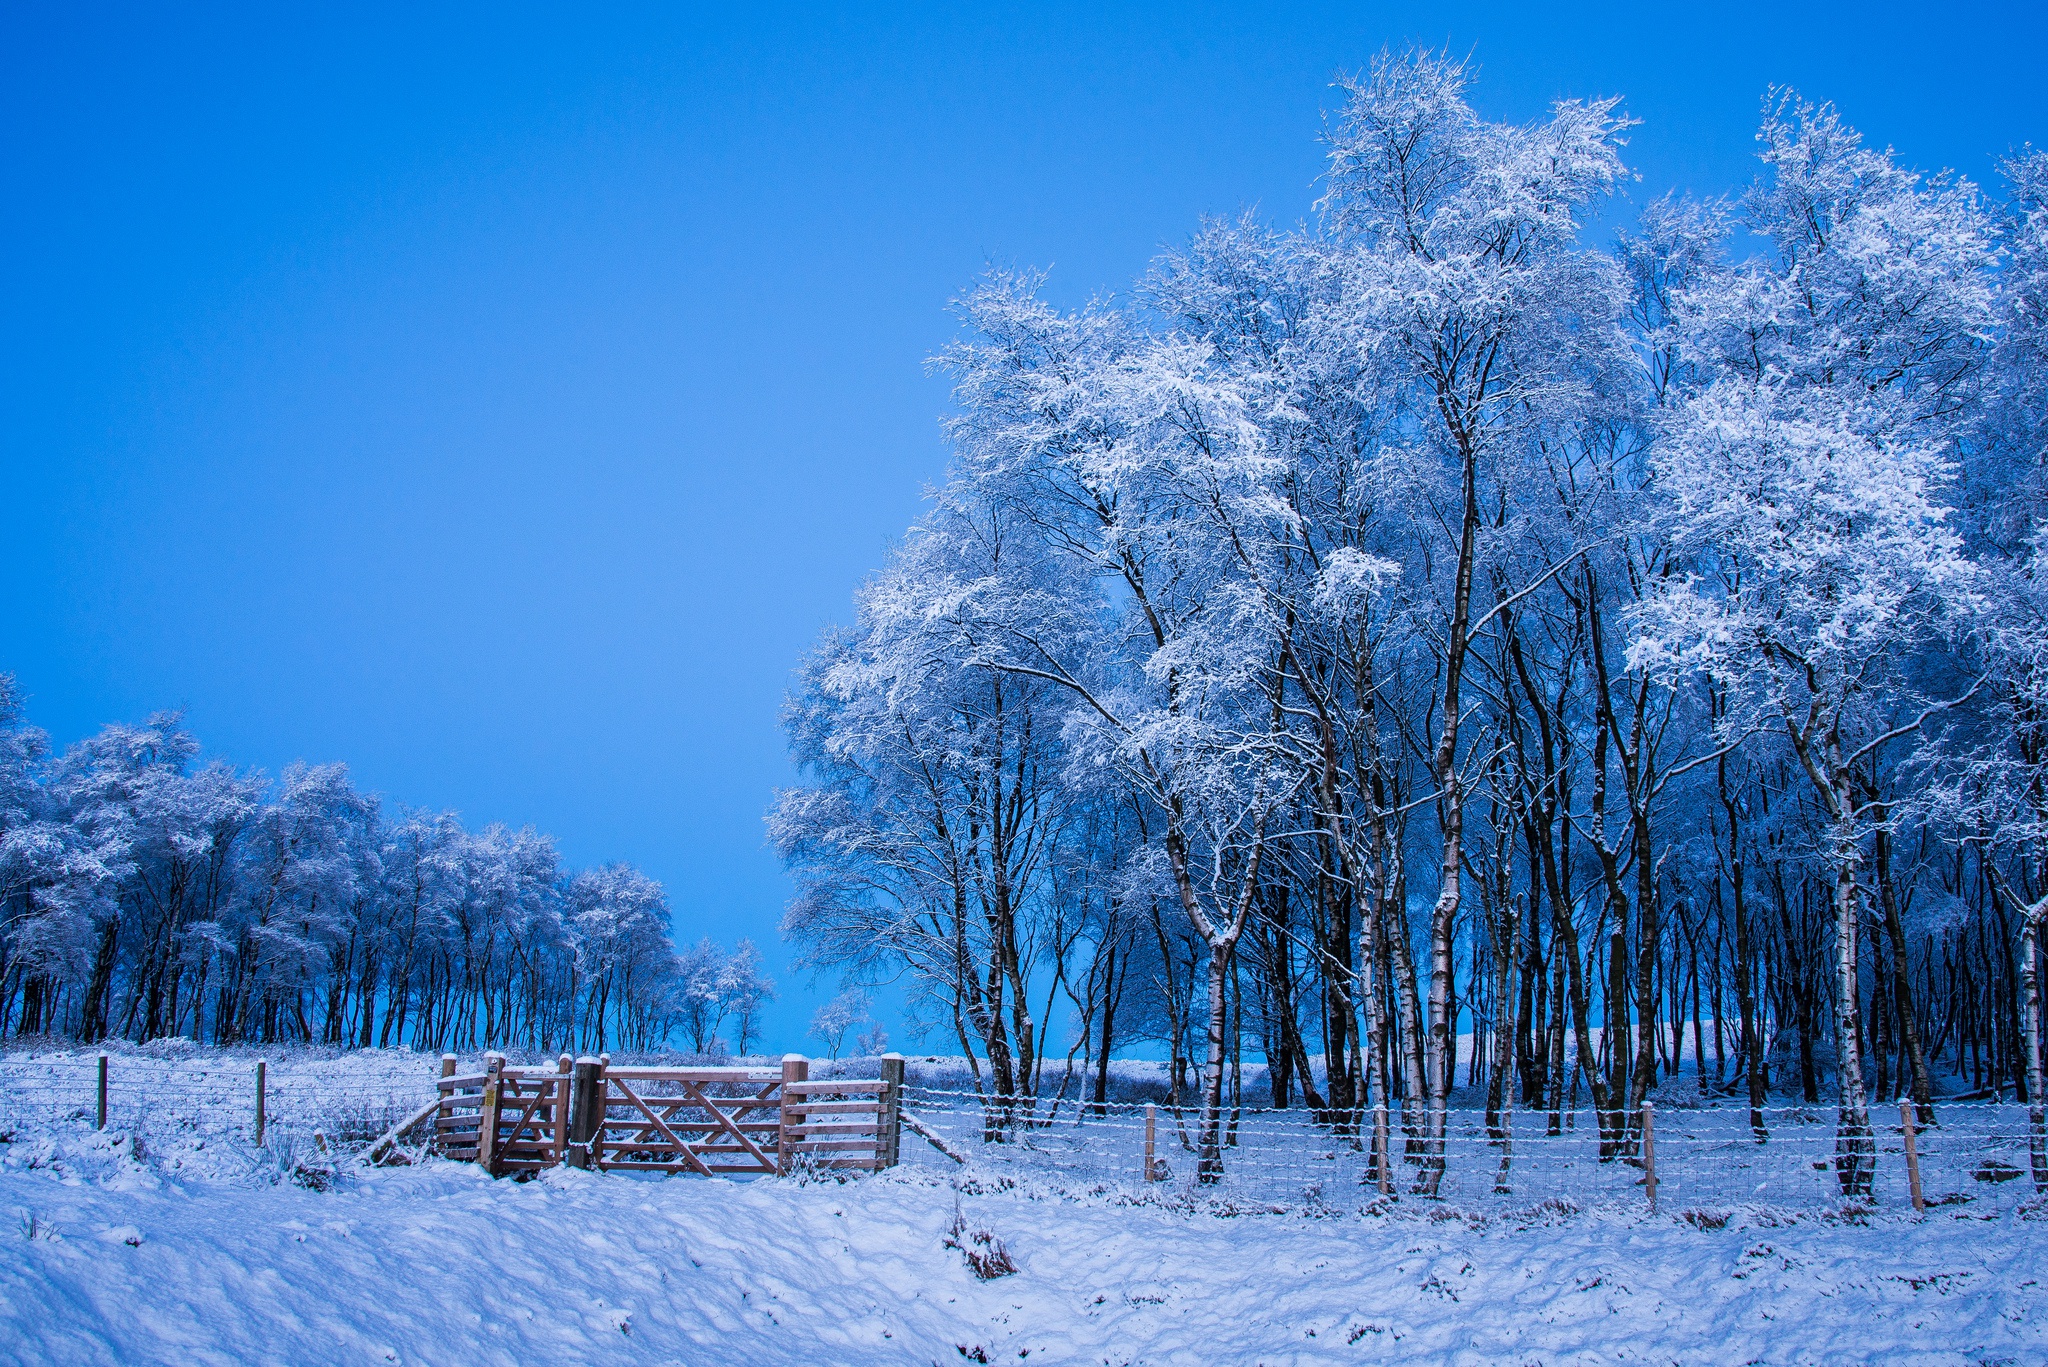 General 2048x1367 winter snow outdoors trees landscape